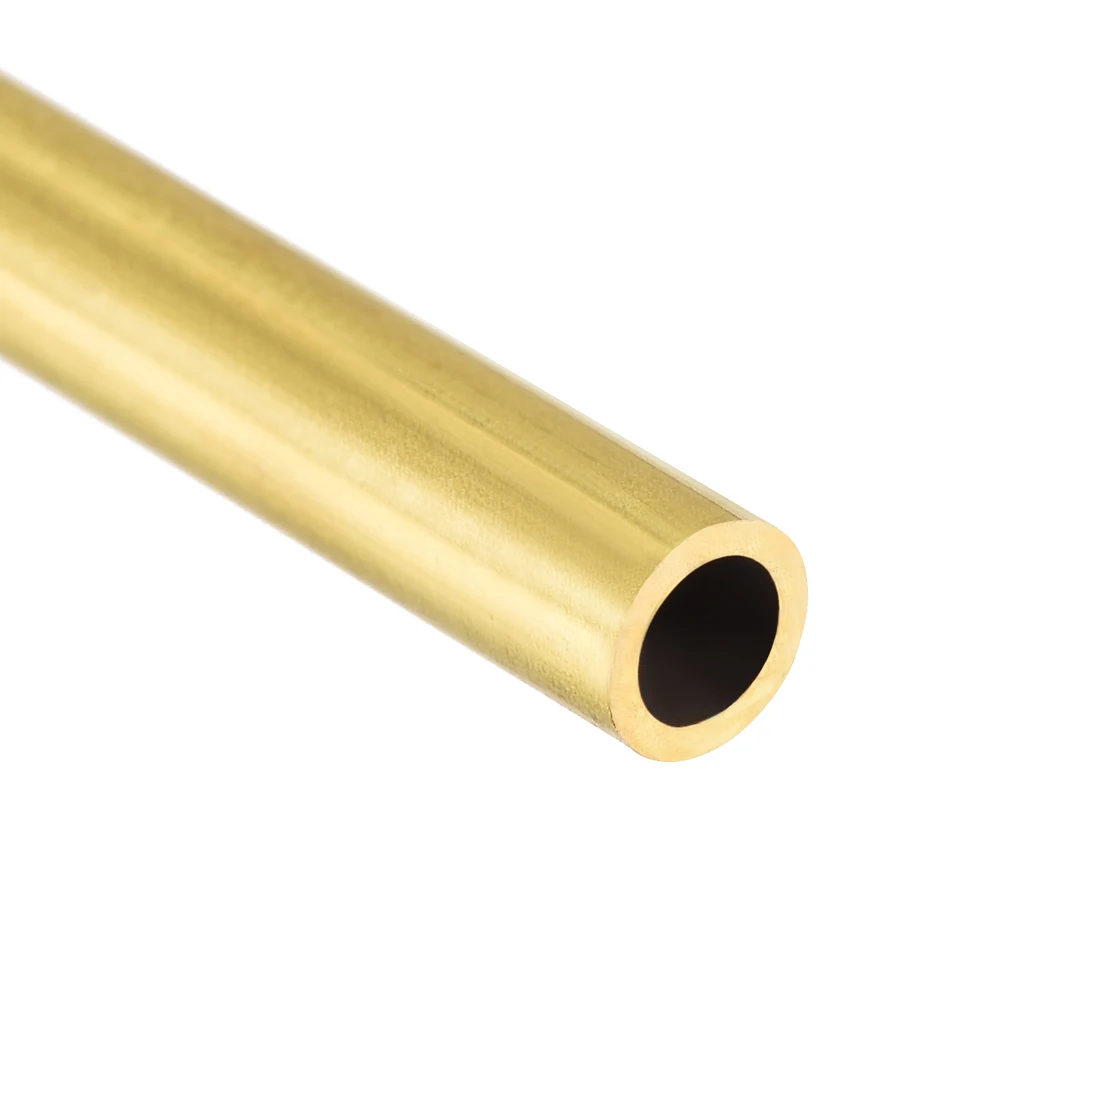 Brass Round Tube 300mm Length 8mm OD 1mm Wall Thickness Seamless Tubing 3 Pcs 